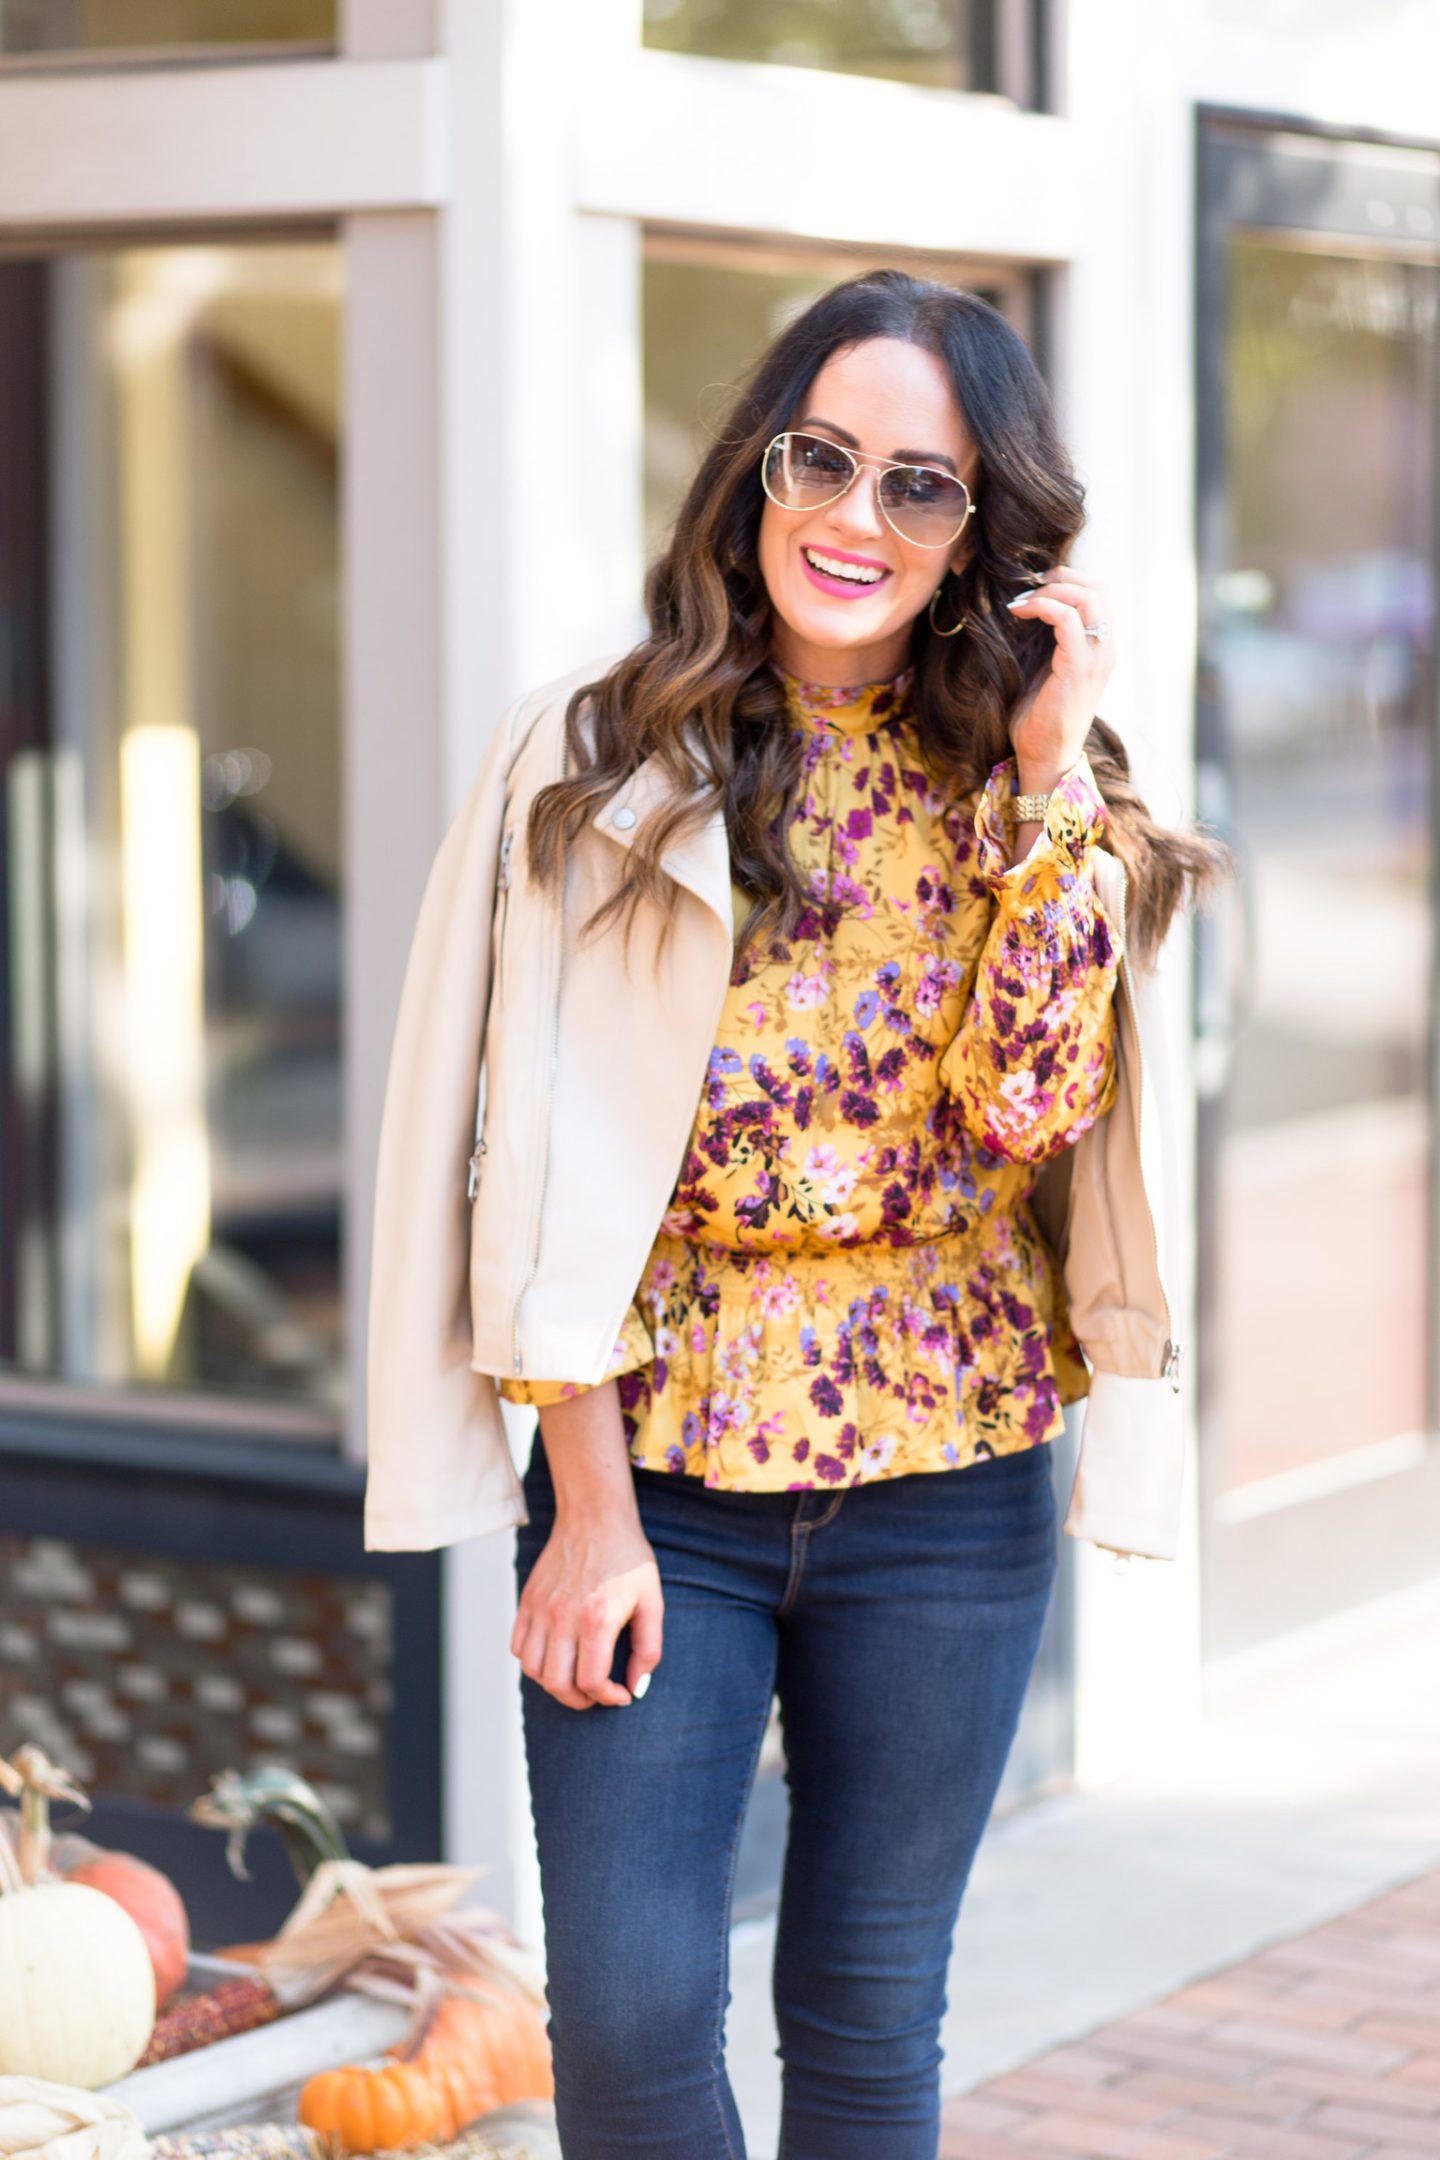 5 Affordable Fall Trends To Try - The Double Take Girls